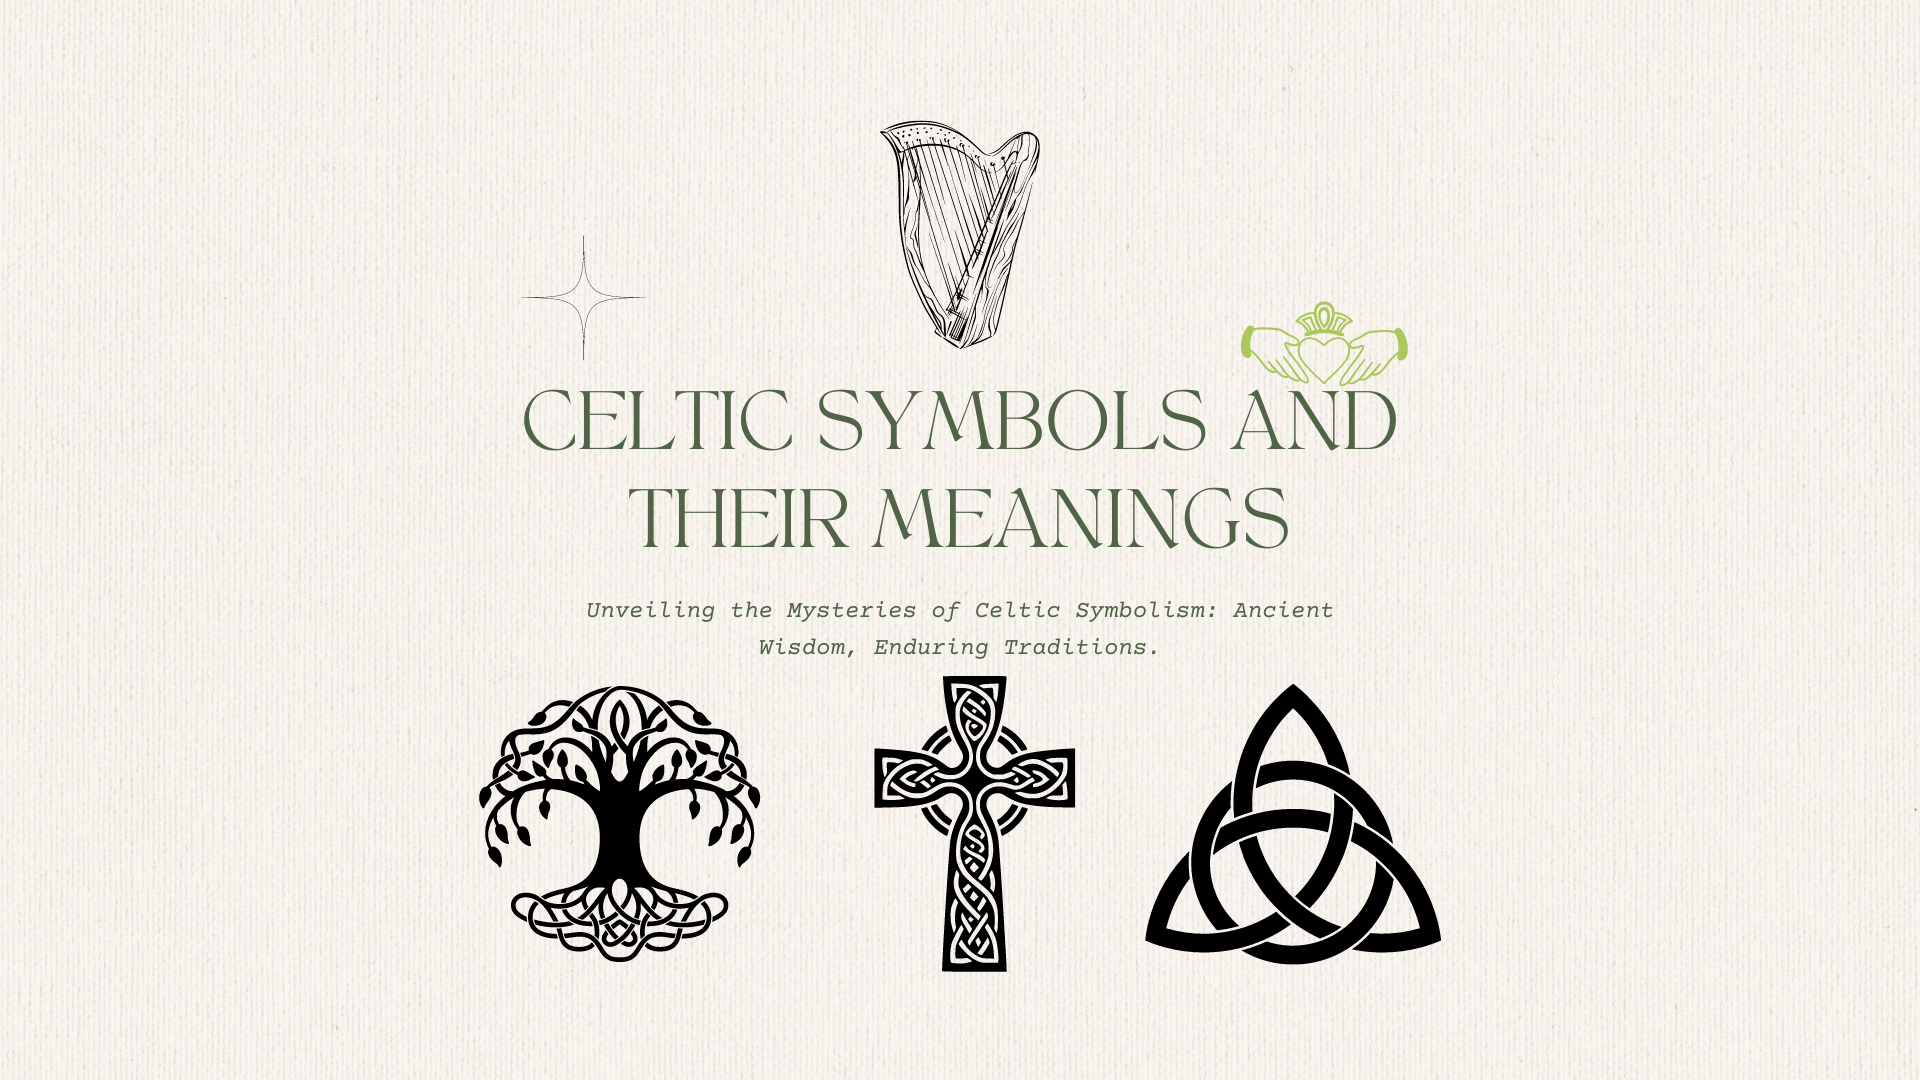 Unveiling the Mysteries of Celtic Symbolism: Ancient Wisdom, Enduring Traditions.